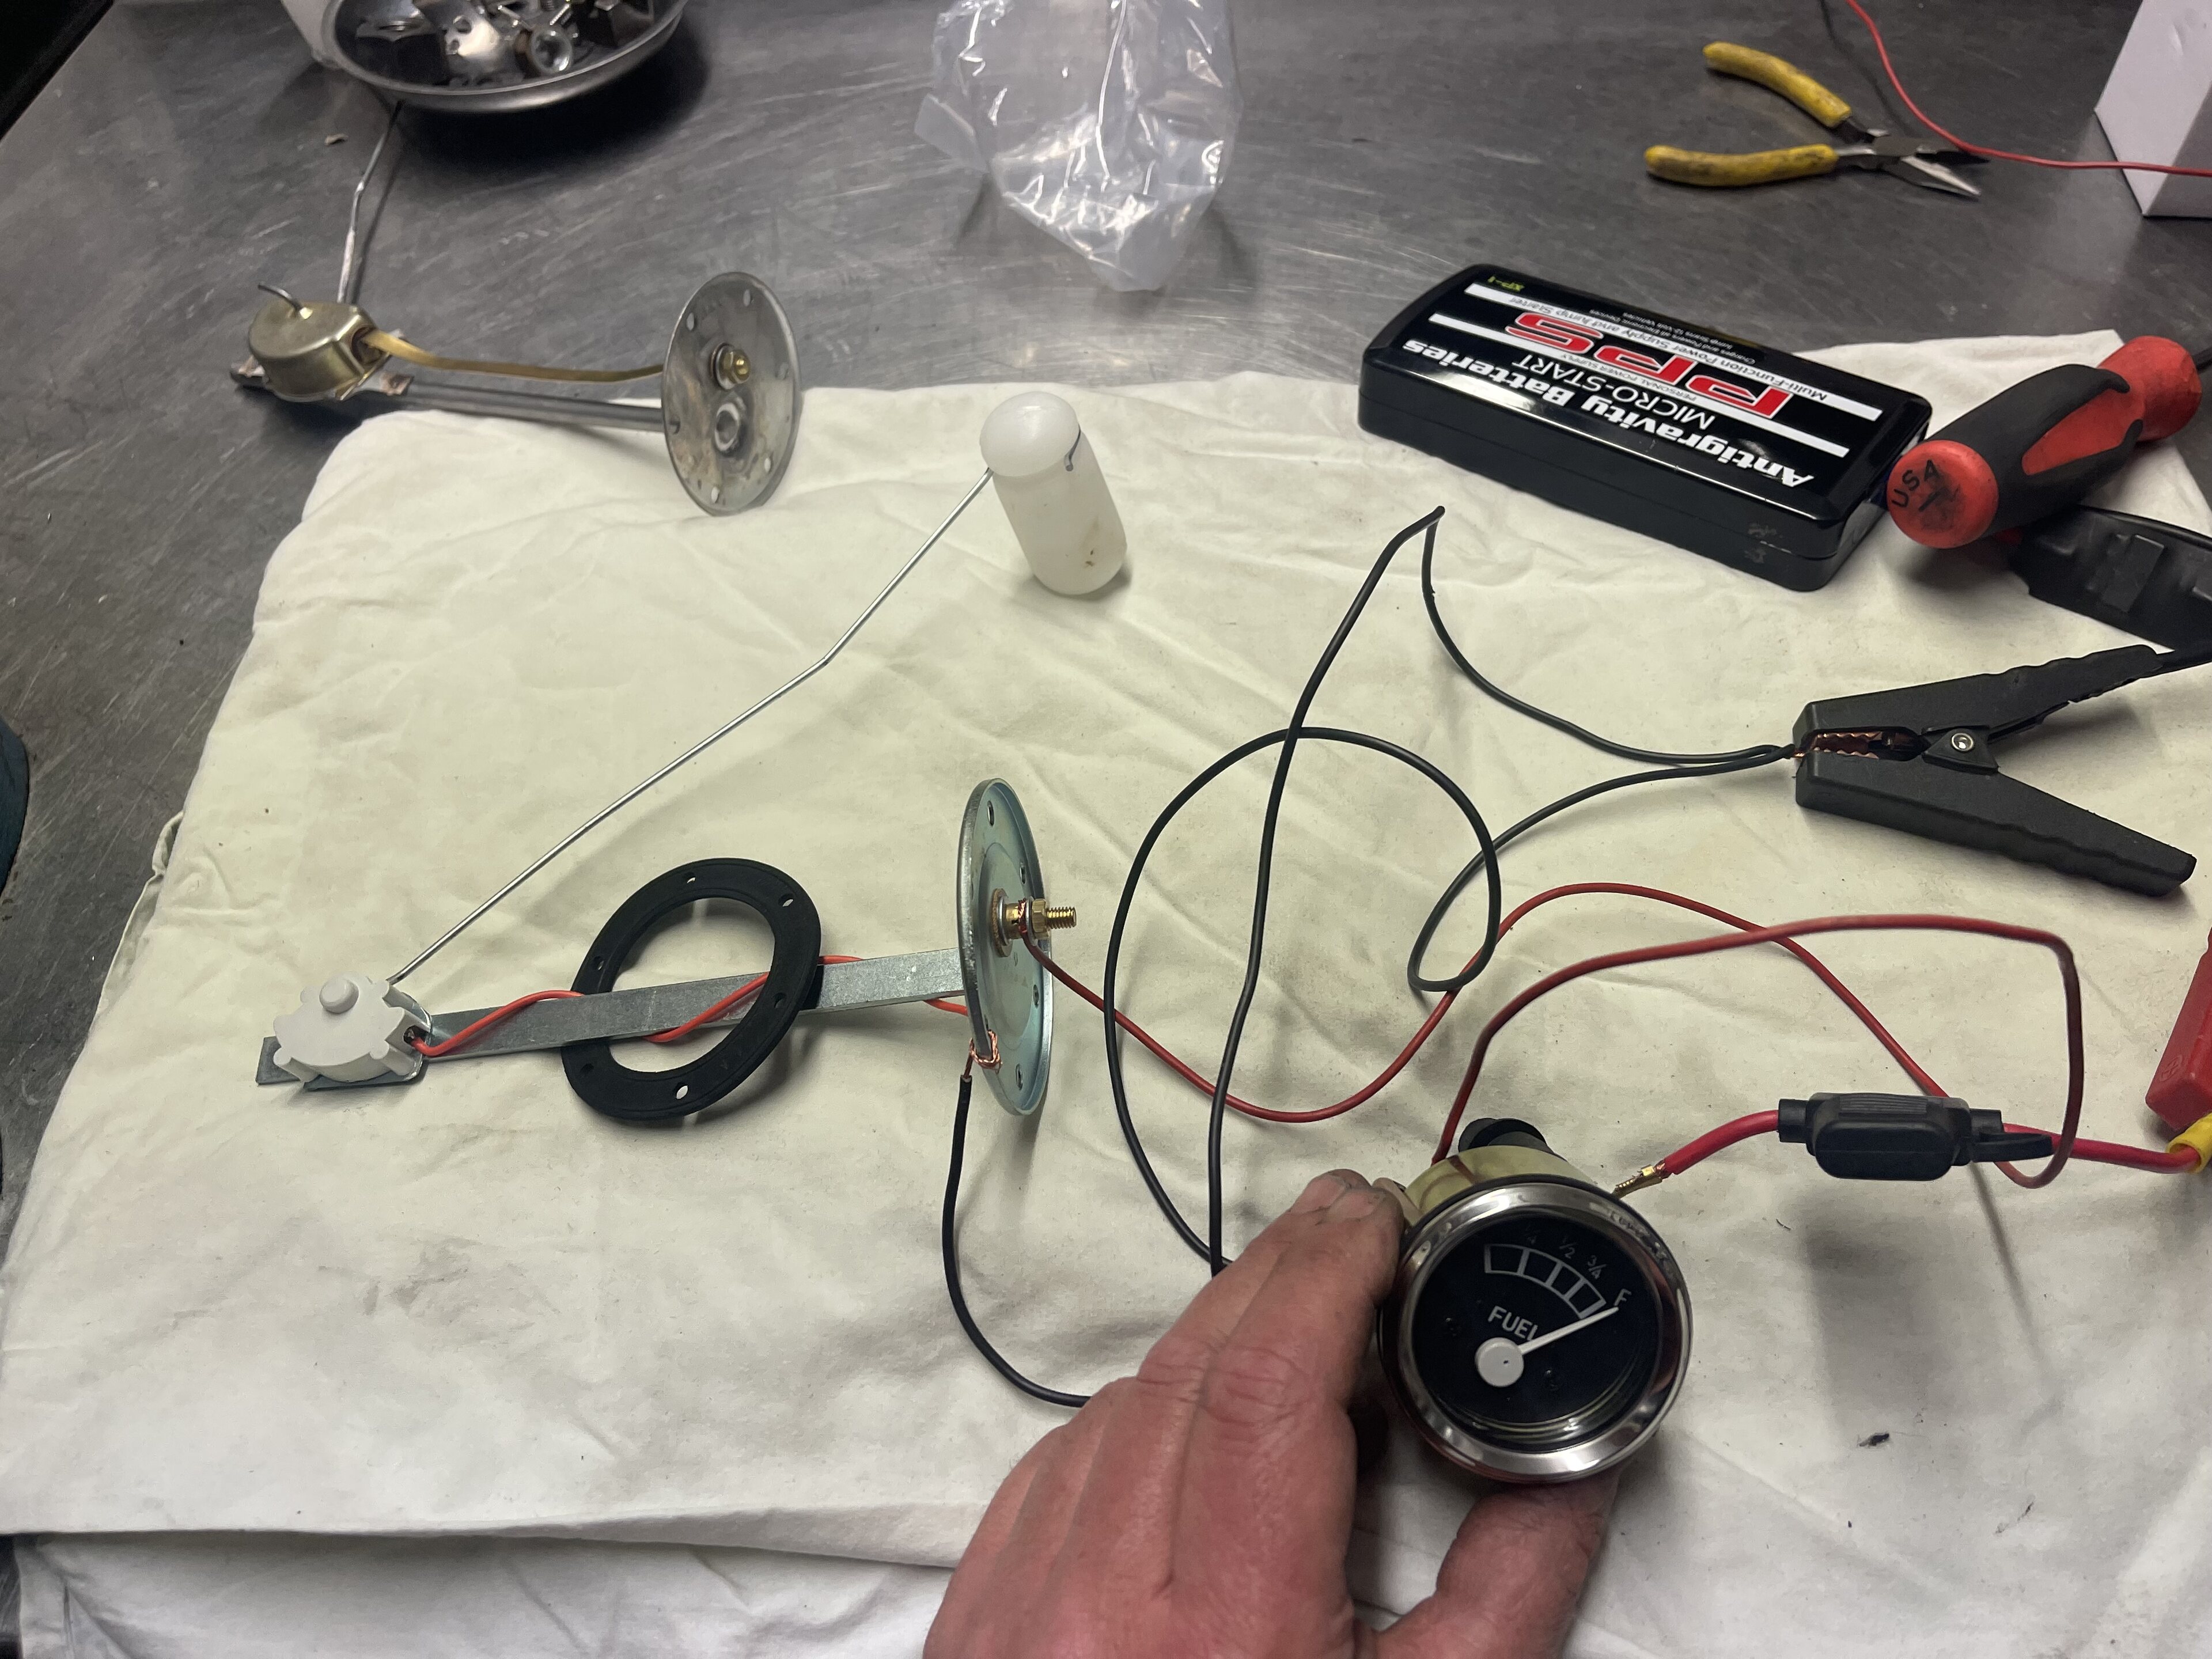 Pistonheads - The image shows a person working with electronic equipment. Various components, including wires, batteries, and possibly a circuit board or other electronic parts, are scattered around on the table. A multimeter is being used to measure something, as indicated by the probes connected to the device. In the background, there is a small amount of clutter that suggests an active workspace. The person's hands indicate they are in the process of setting up or adjusting the equipment.